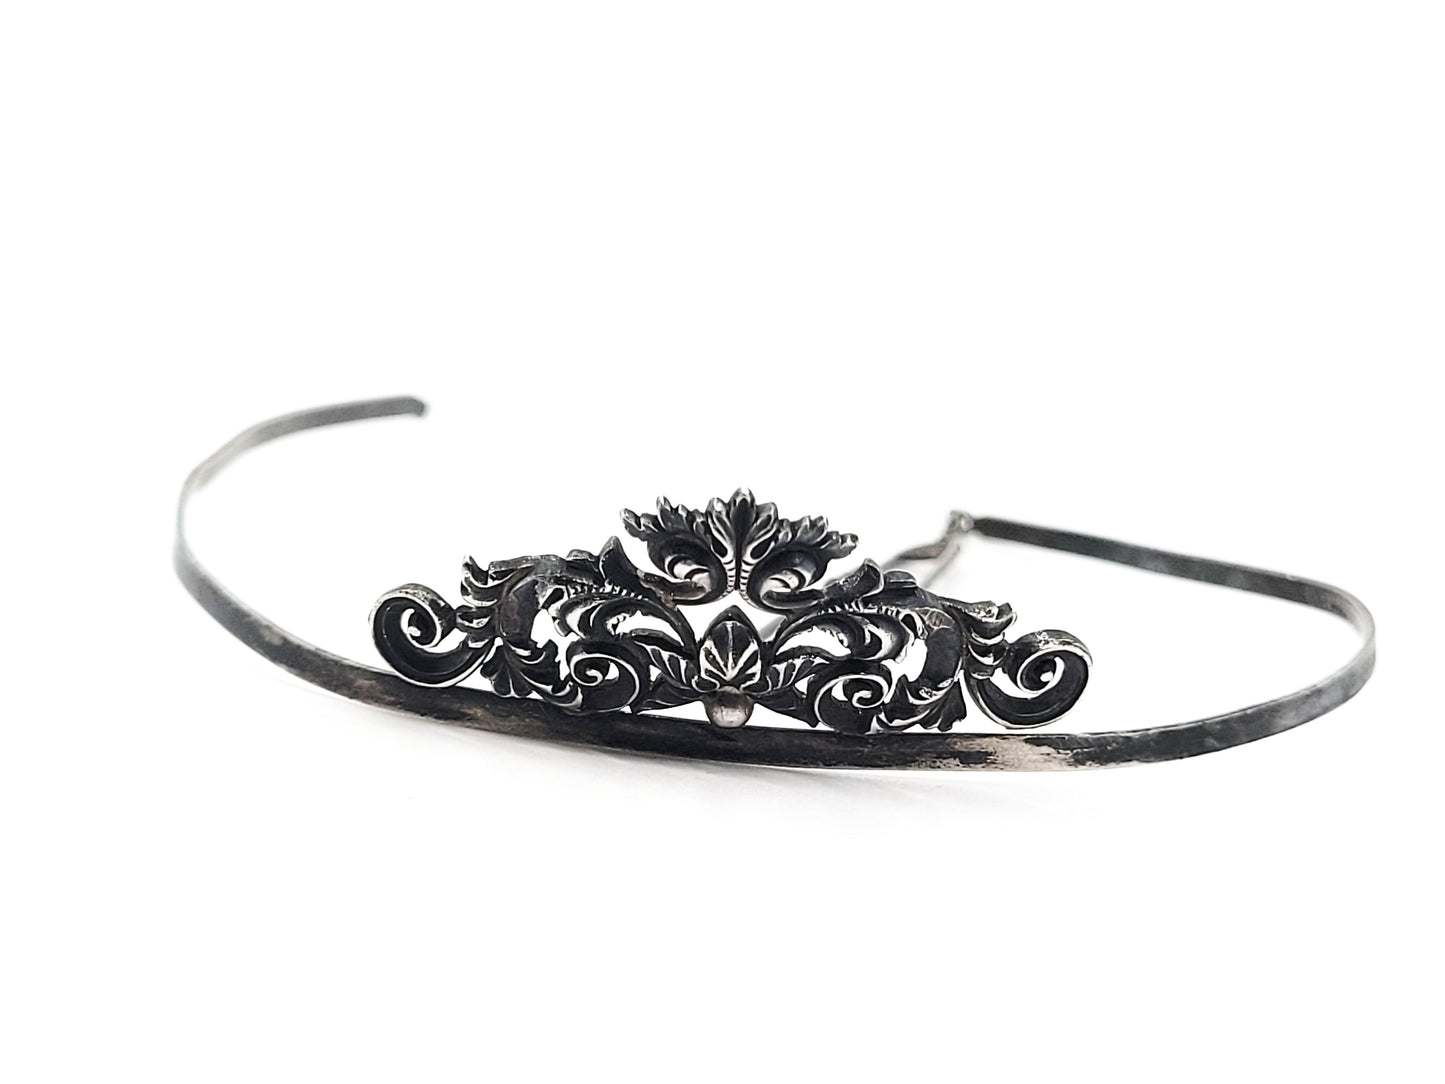 Tiara antique sterling silver cartouche crown hair accessories Wedding Prom